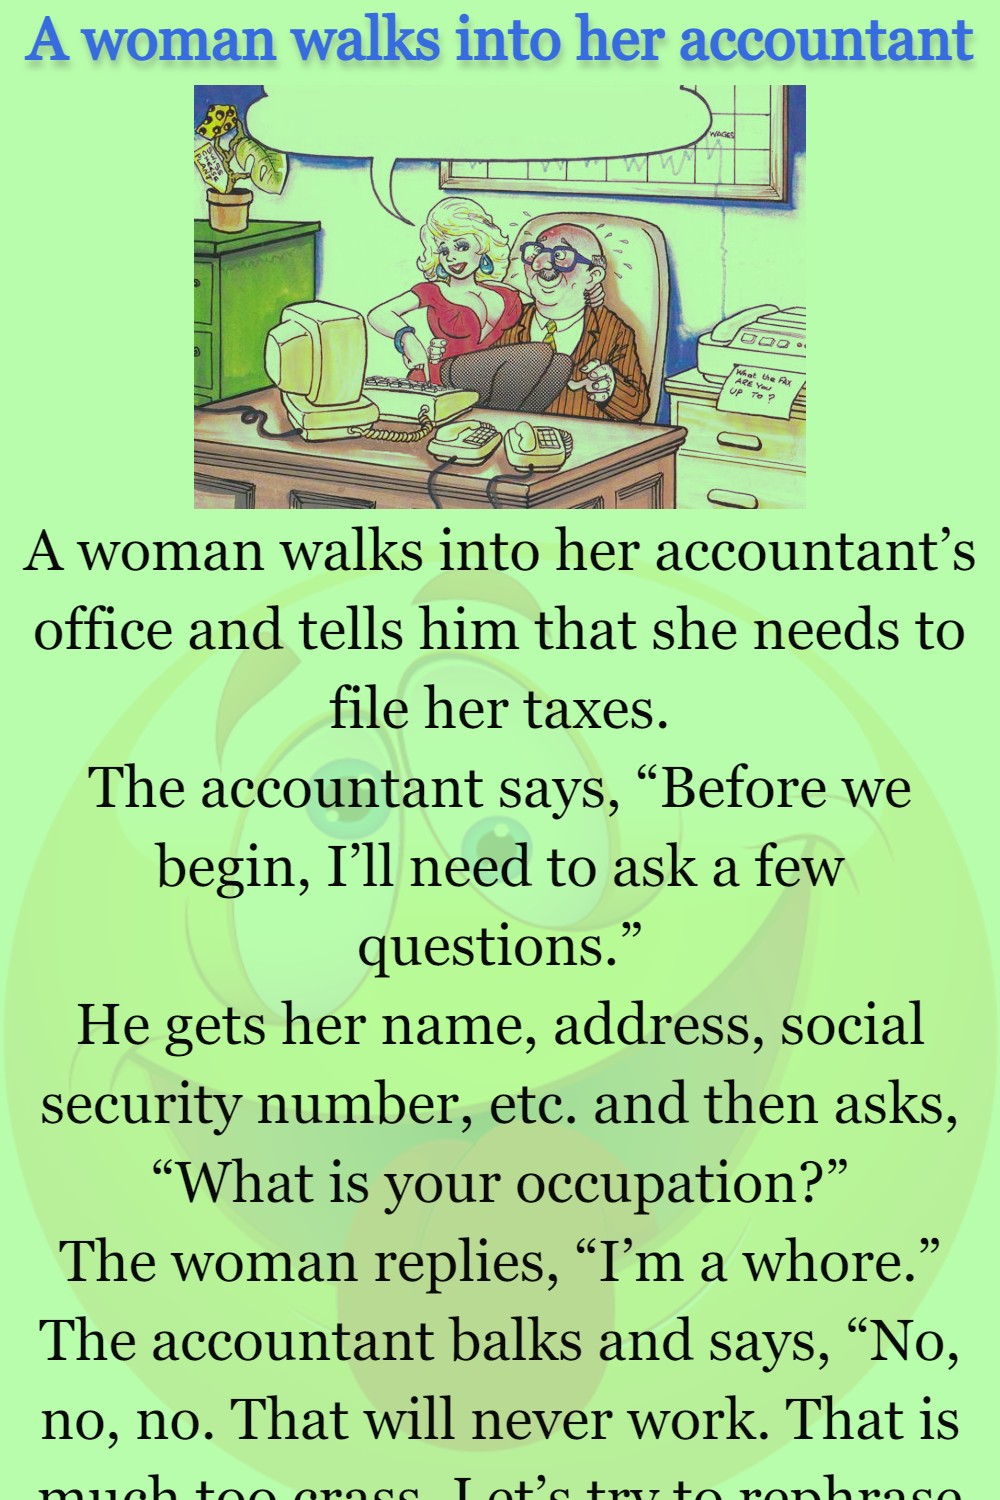 A woman walks into her accountant